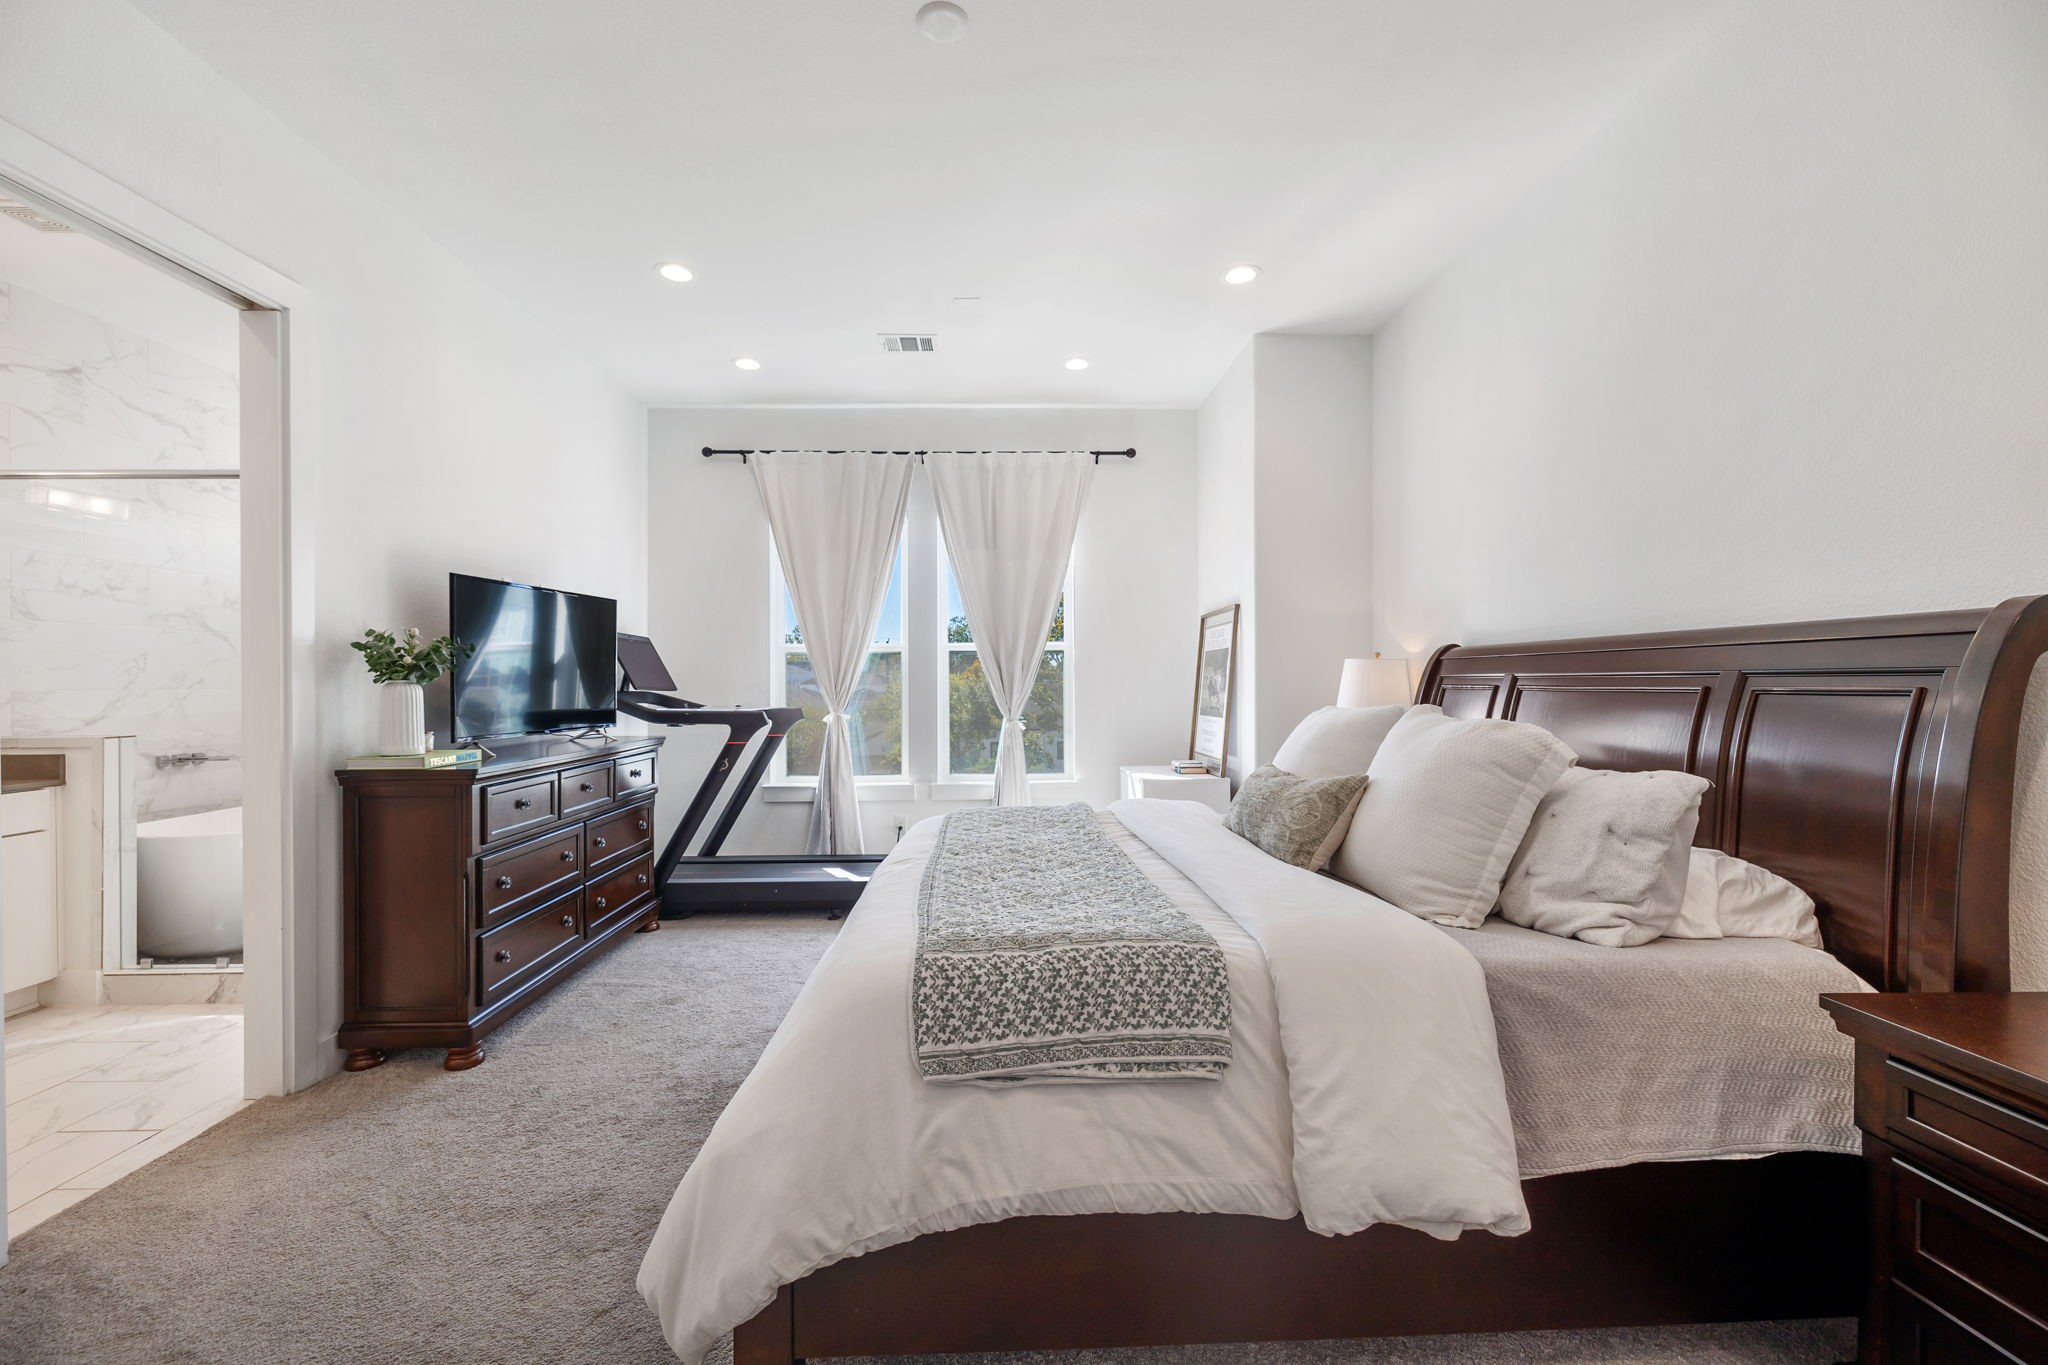 As you reach the third floor you are greeted by the luxurious primary suite.  The bedroom has large windows, electronic shades + a beautiful retreat style bath.